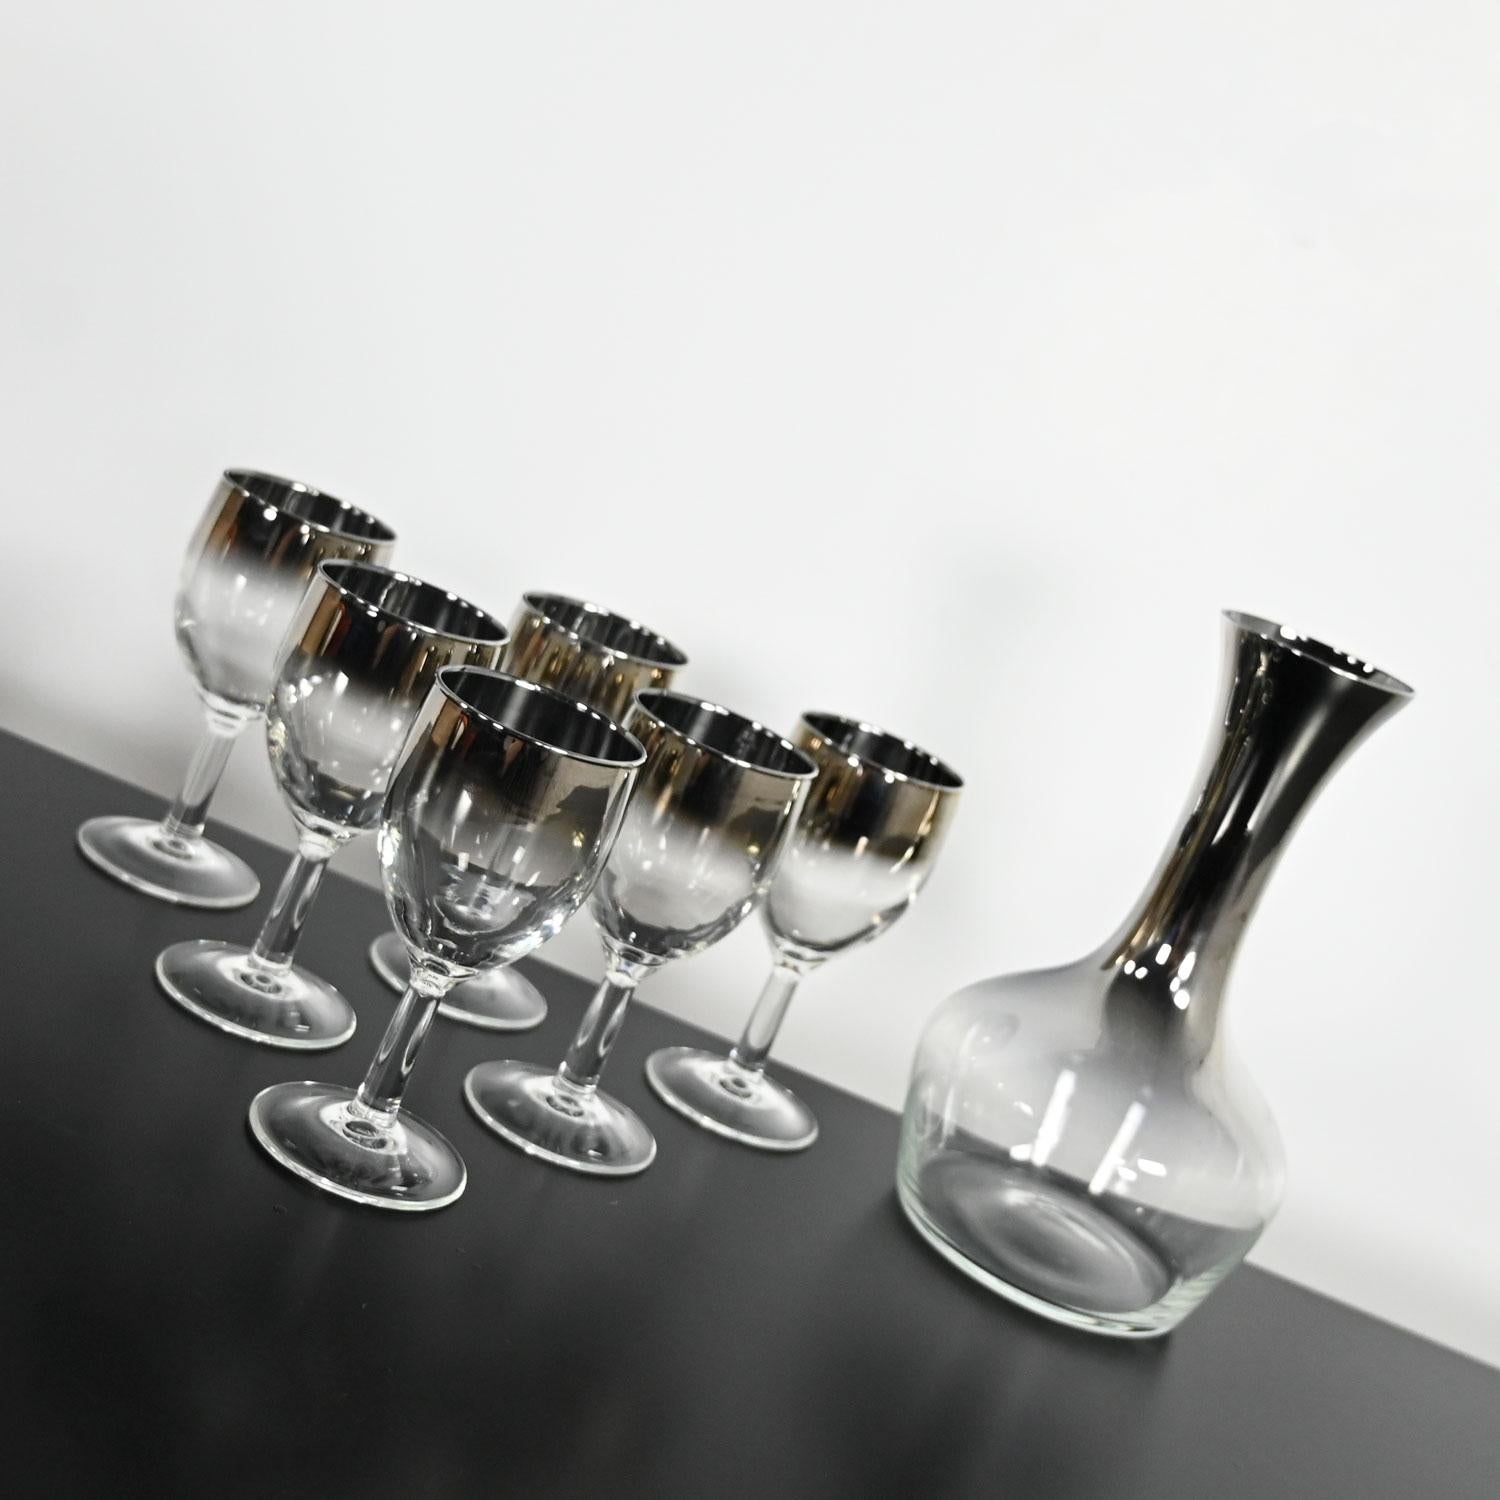 Stunning vintage Mid-Century Modern beverage serving set of six silver rimmed ombre French stem glasses and one carafe or decanter. In the style of Dorothy Thorpe but unsigned. Beautiful condition, keeping in mind that these are vintage and not new